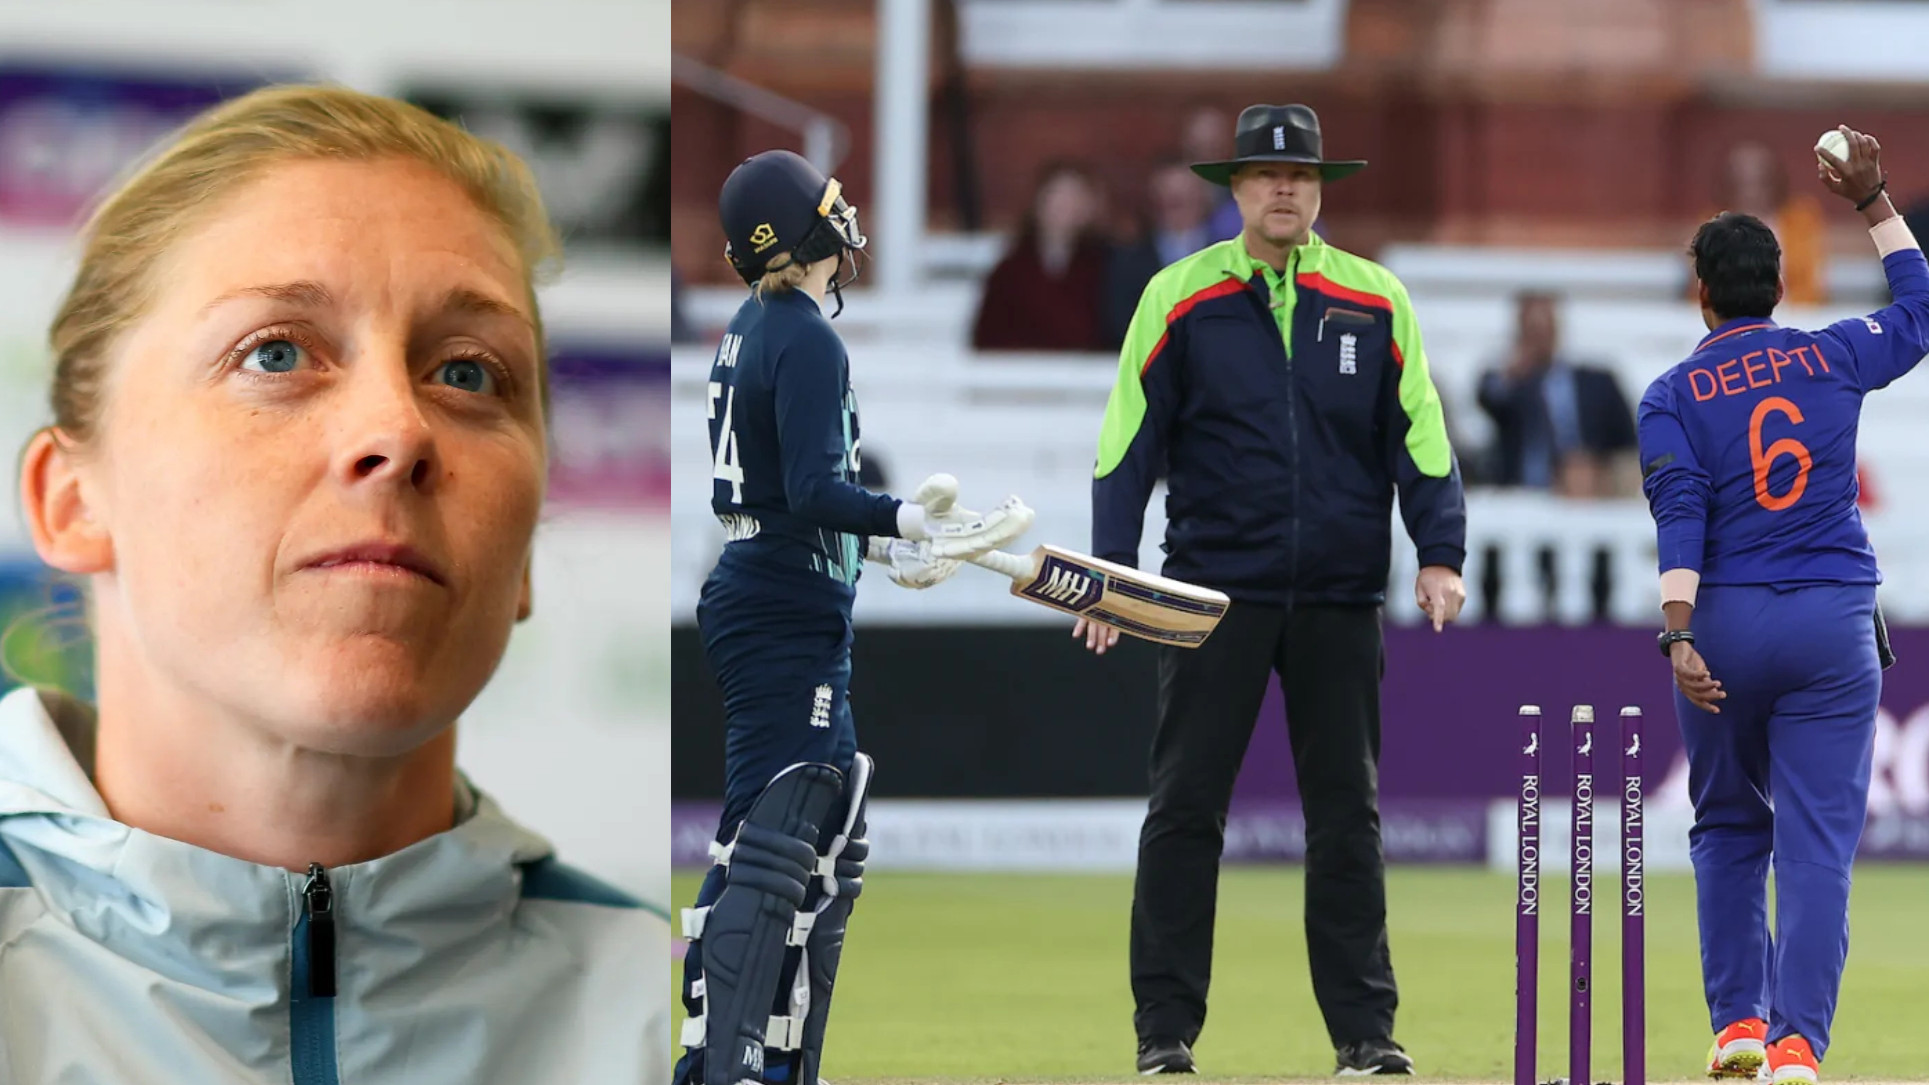 “No warnings were given, India don't need to lie,” England’s Heather Knight refutes Deepti Sharma’s claims